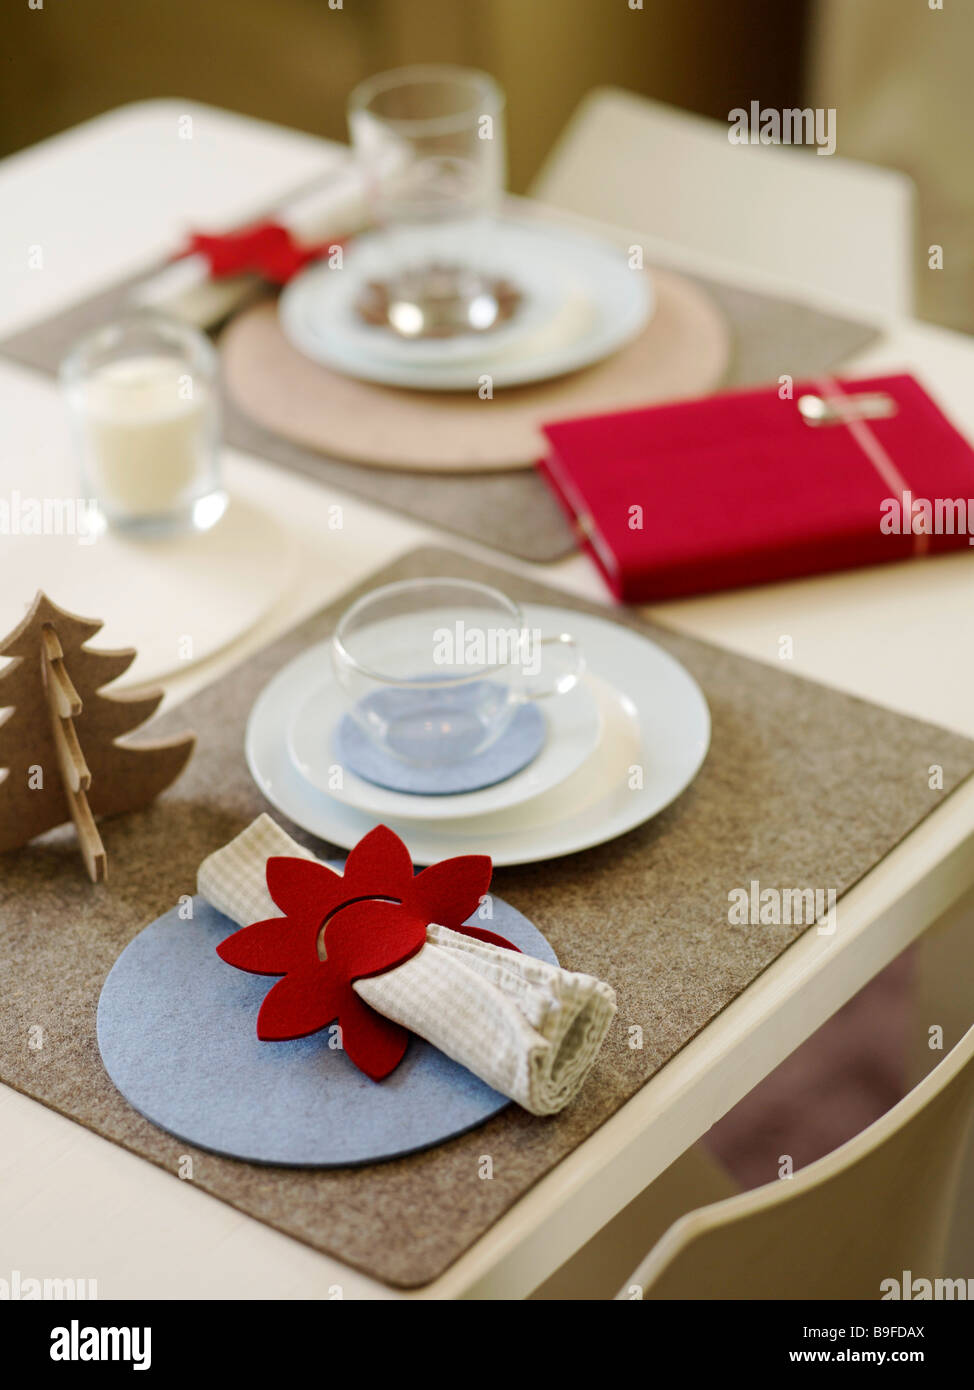 Place setting on table Stock Photo